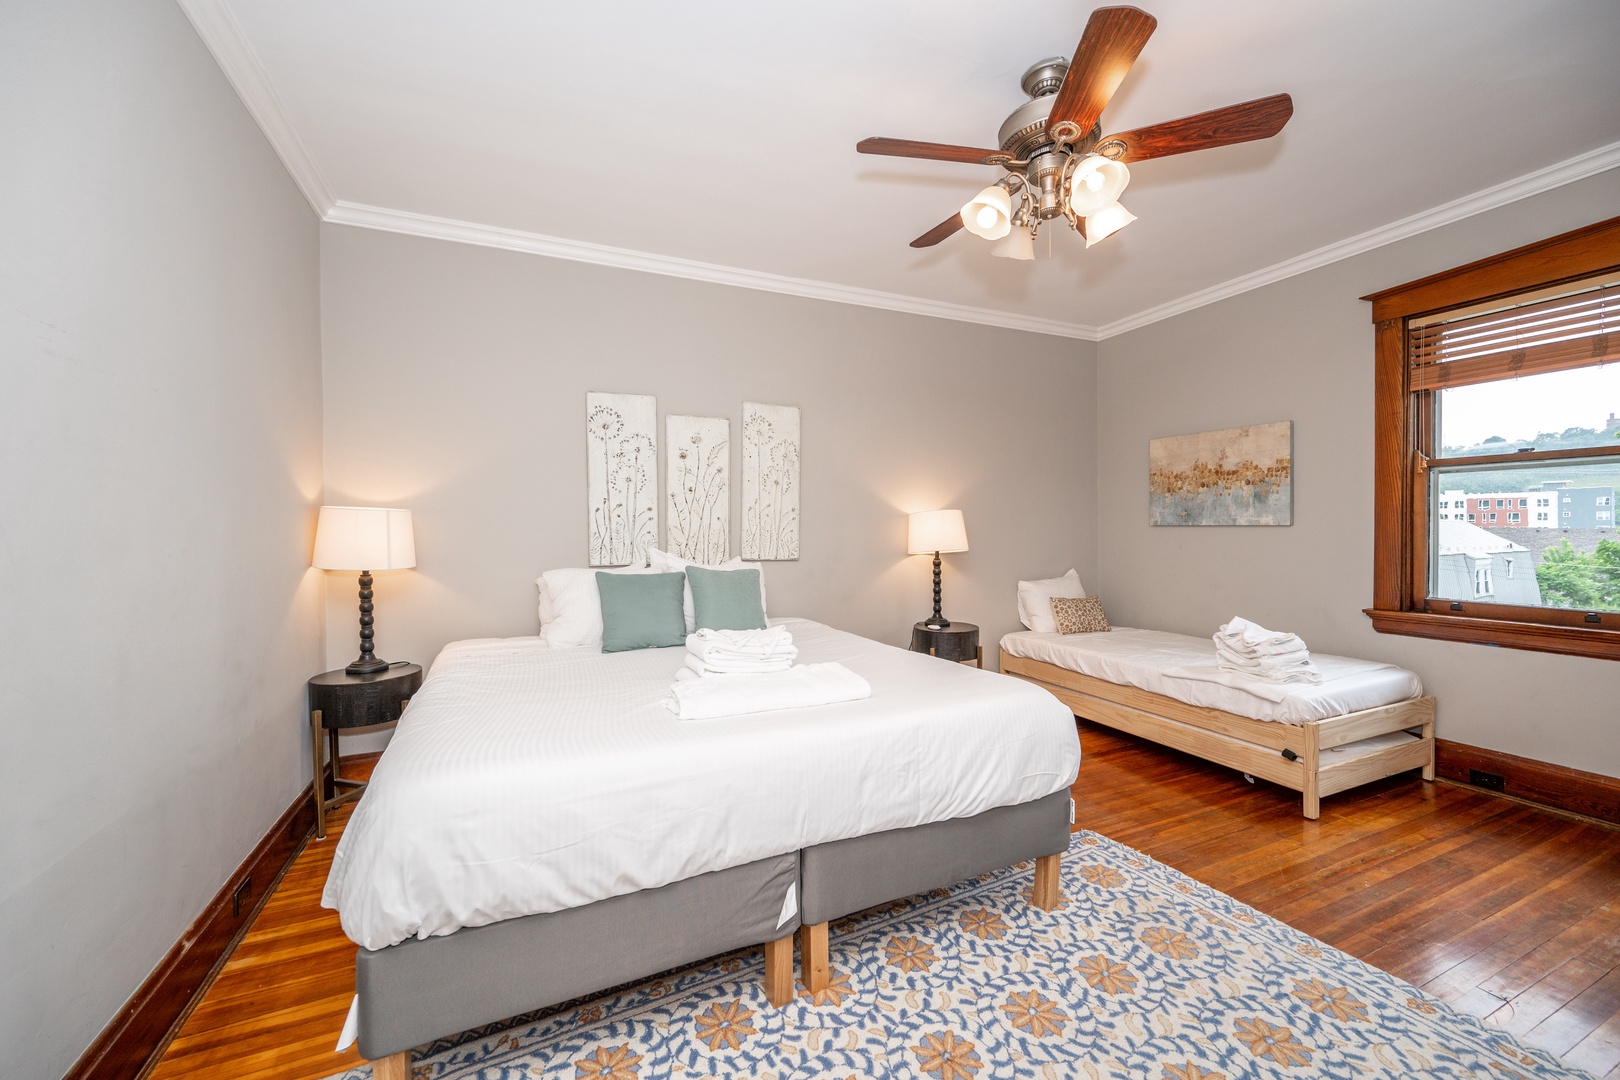 This bedroom retreat on the 2nd floor offers a plush king & twin bed